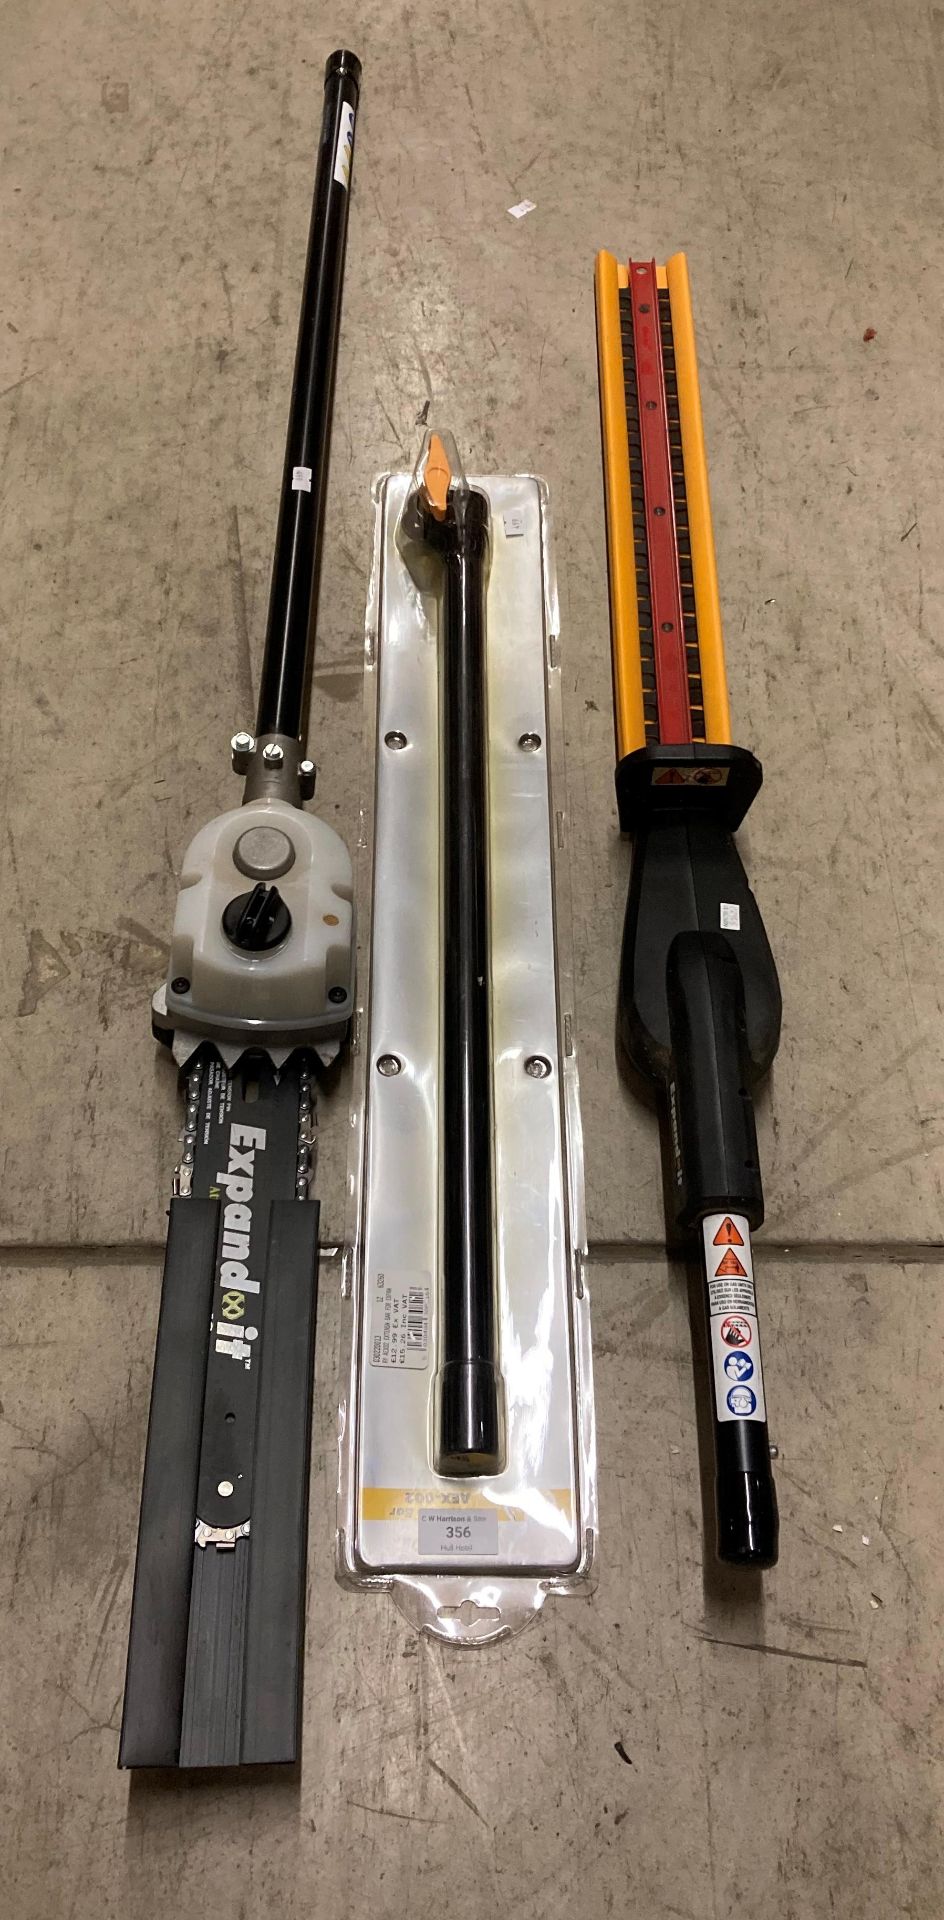 3 x Exspandit attachments including a 25cm chainsaw, a hedge cutter (AHF08),